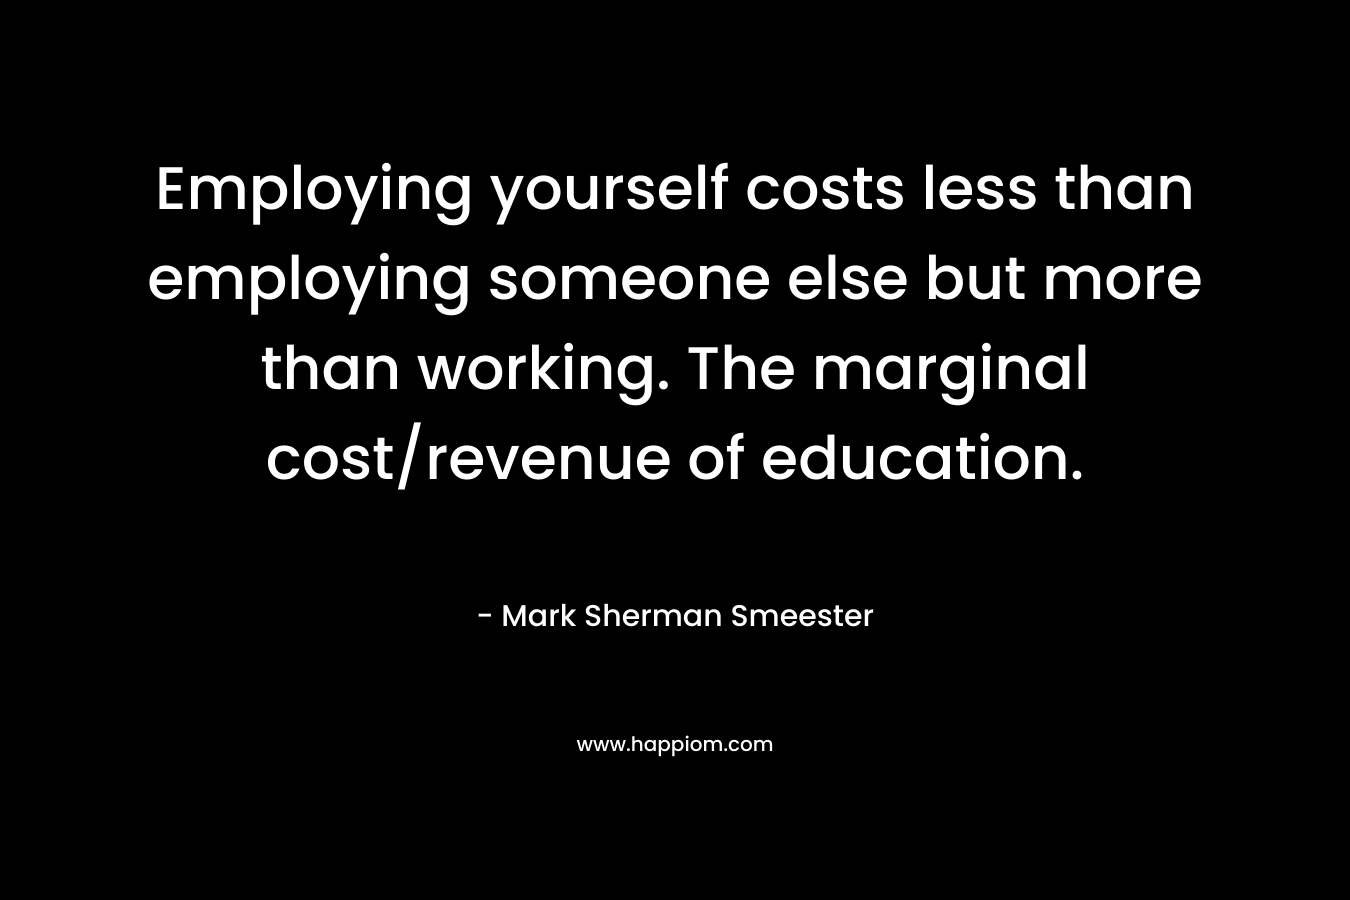 Employing yourself costs less than employing someone else but more than working. The marginal cost/revenue of education. – Mark Sherman Smeester